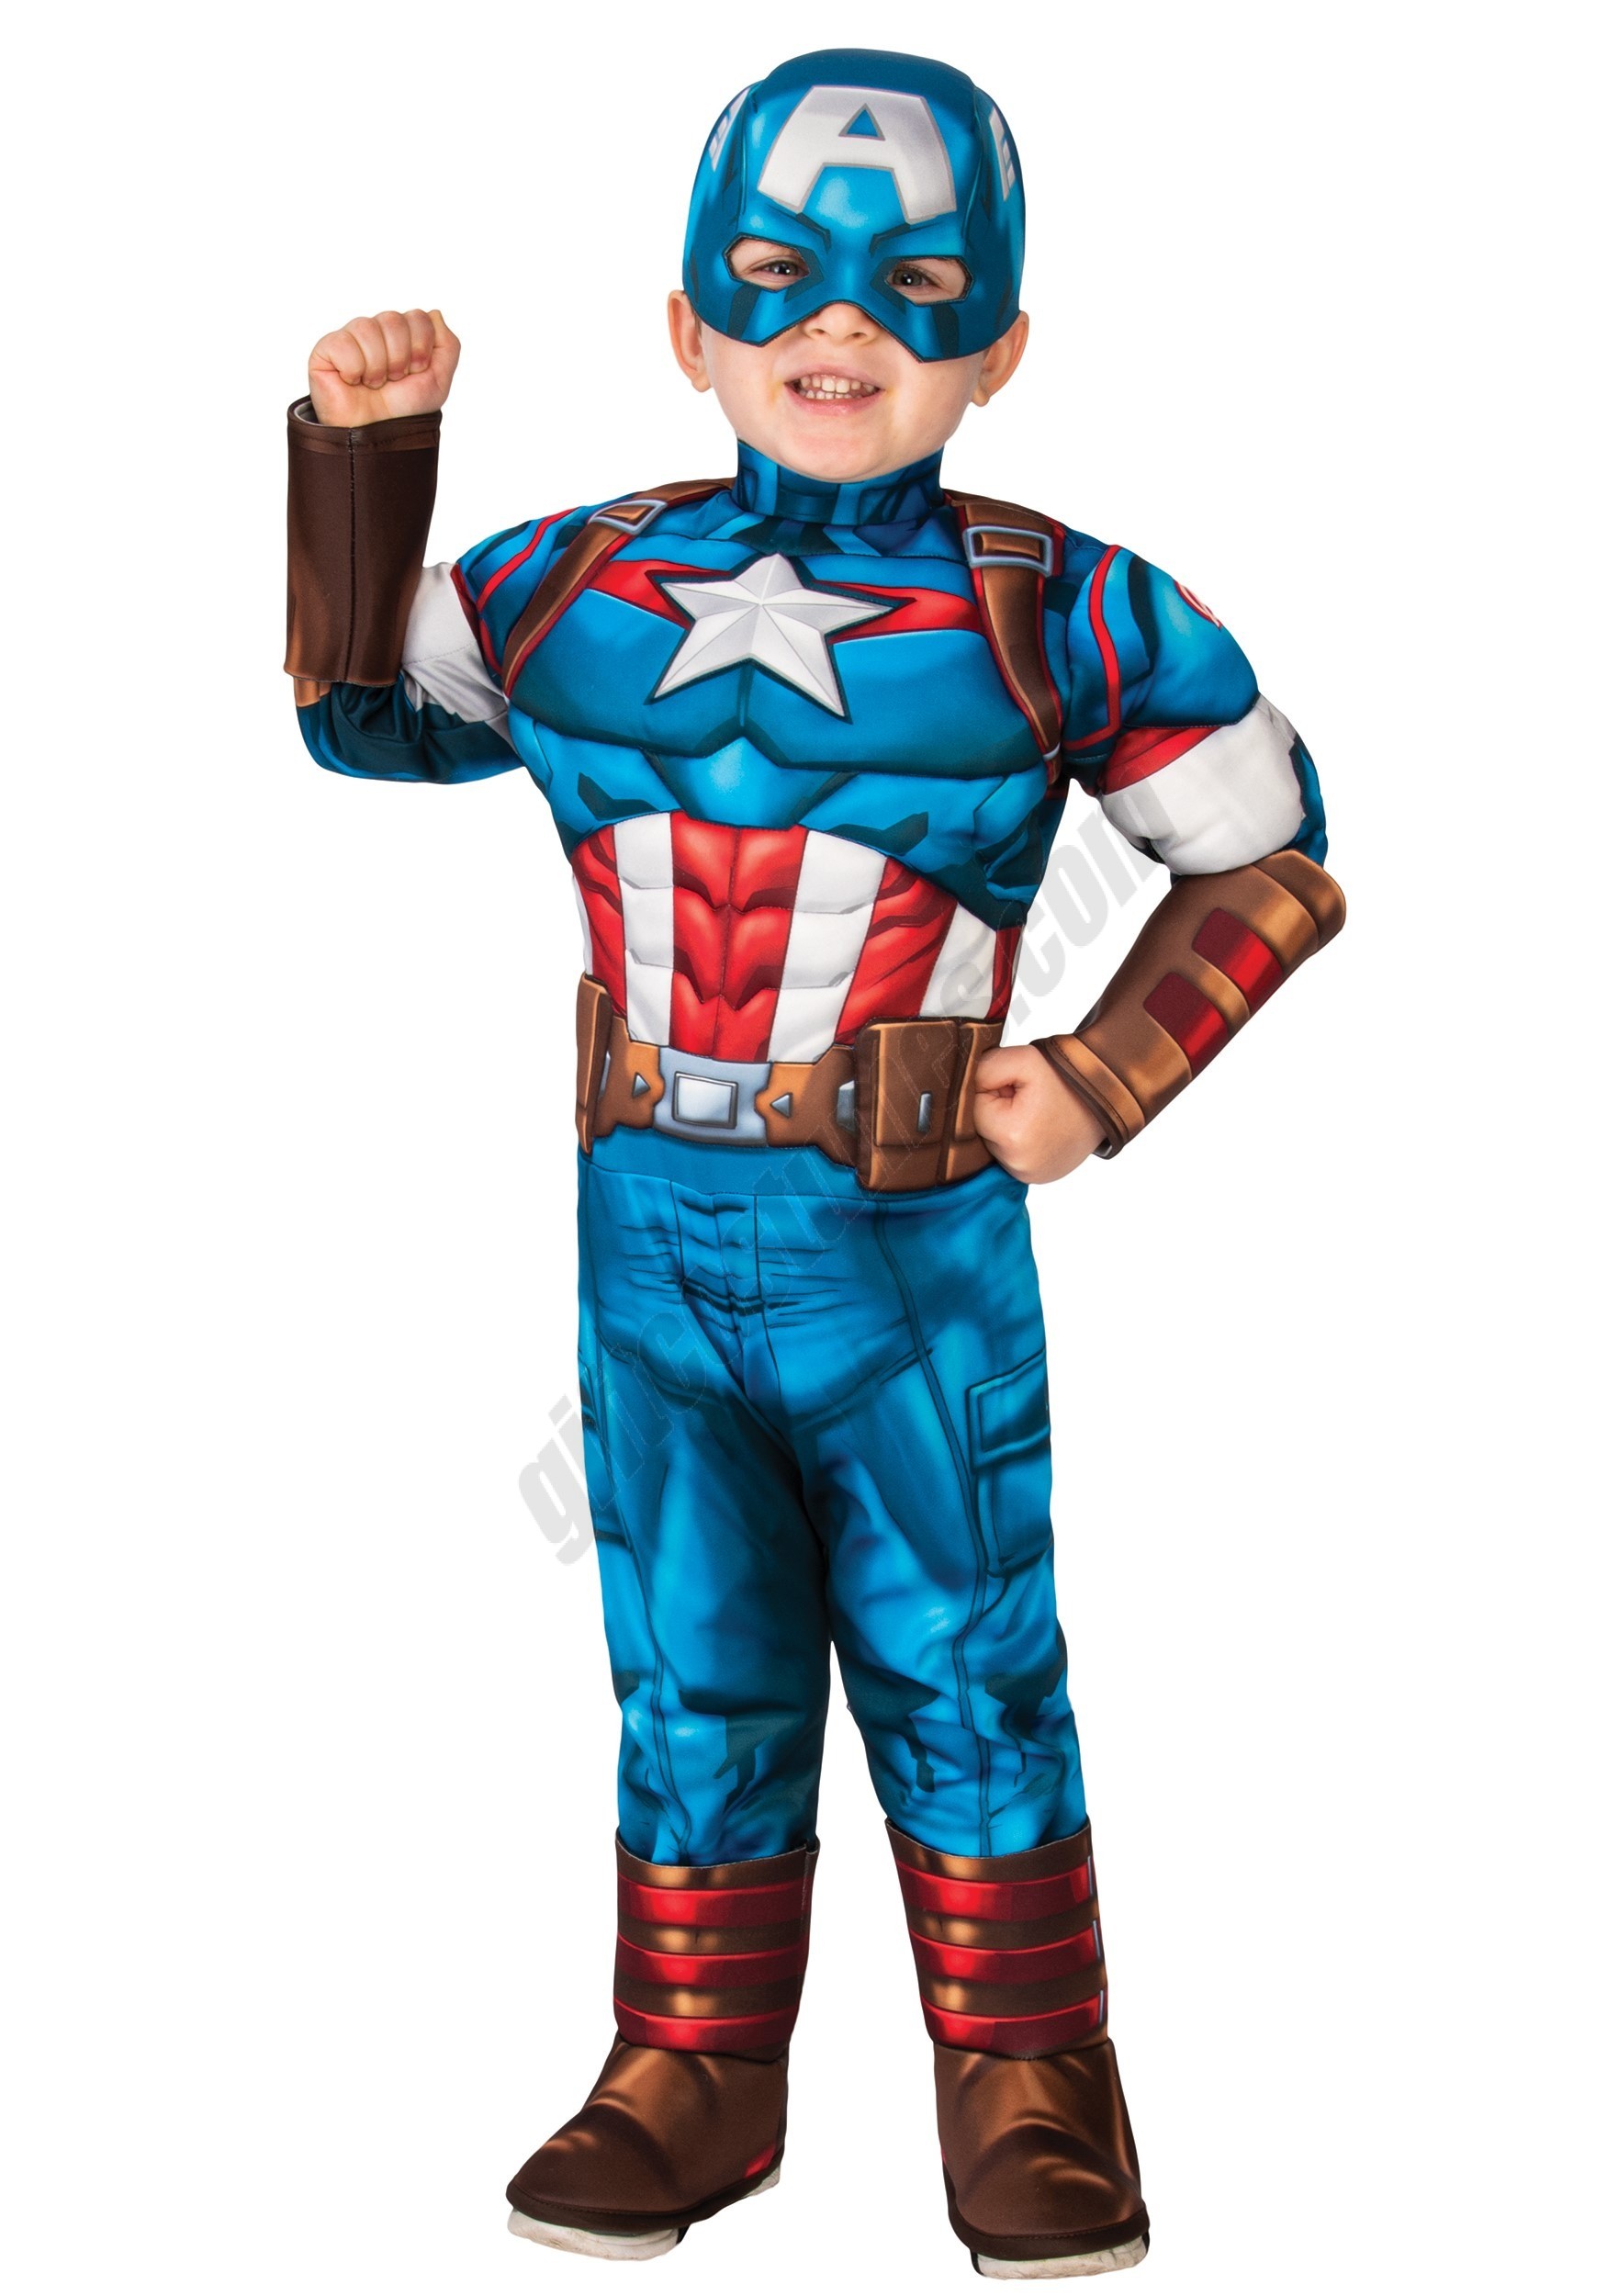 Captain America Toddler Costume Promotions - Captain America Toddler Costume Promotions